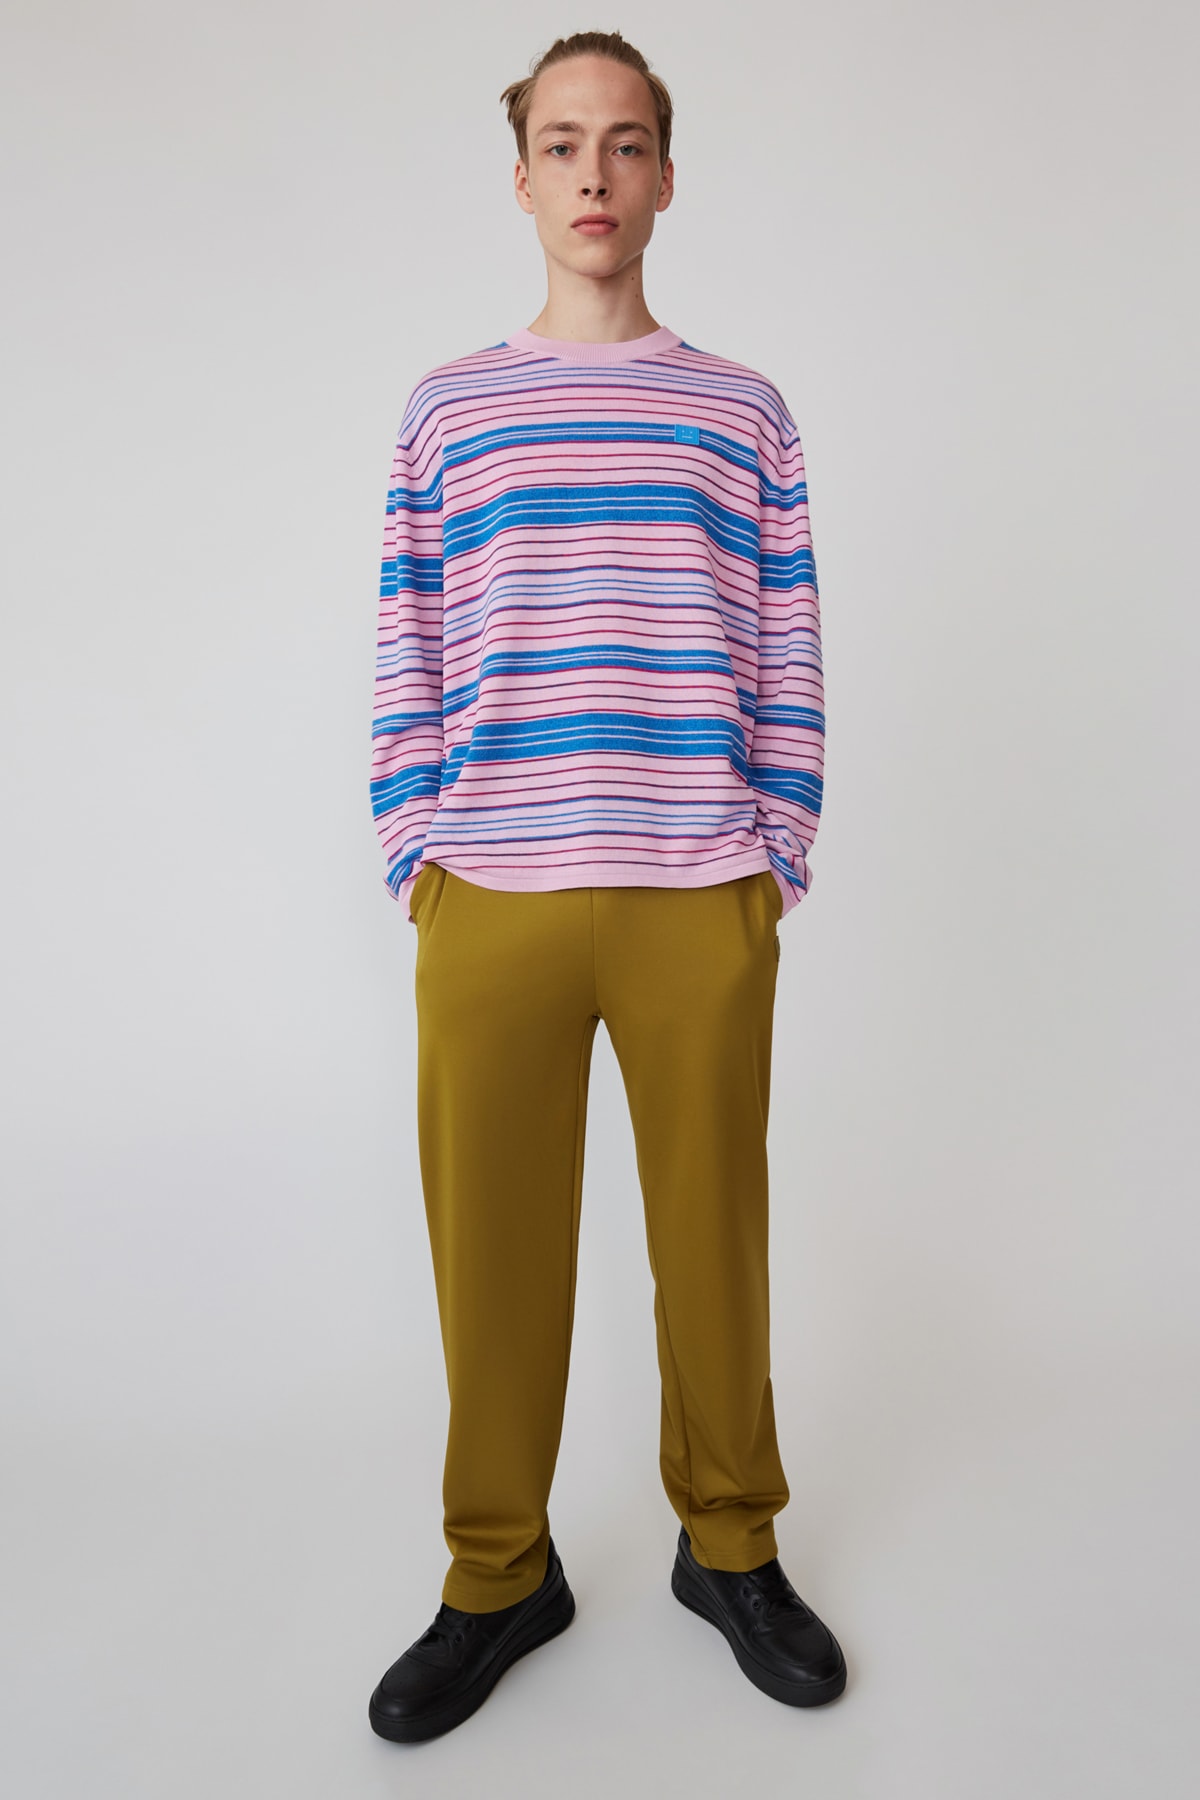 Acne Studios Spring/Summer 2019 Face Collection Striped Shirt Purple Pants Brown